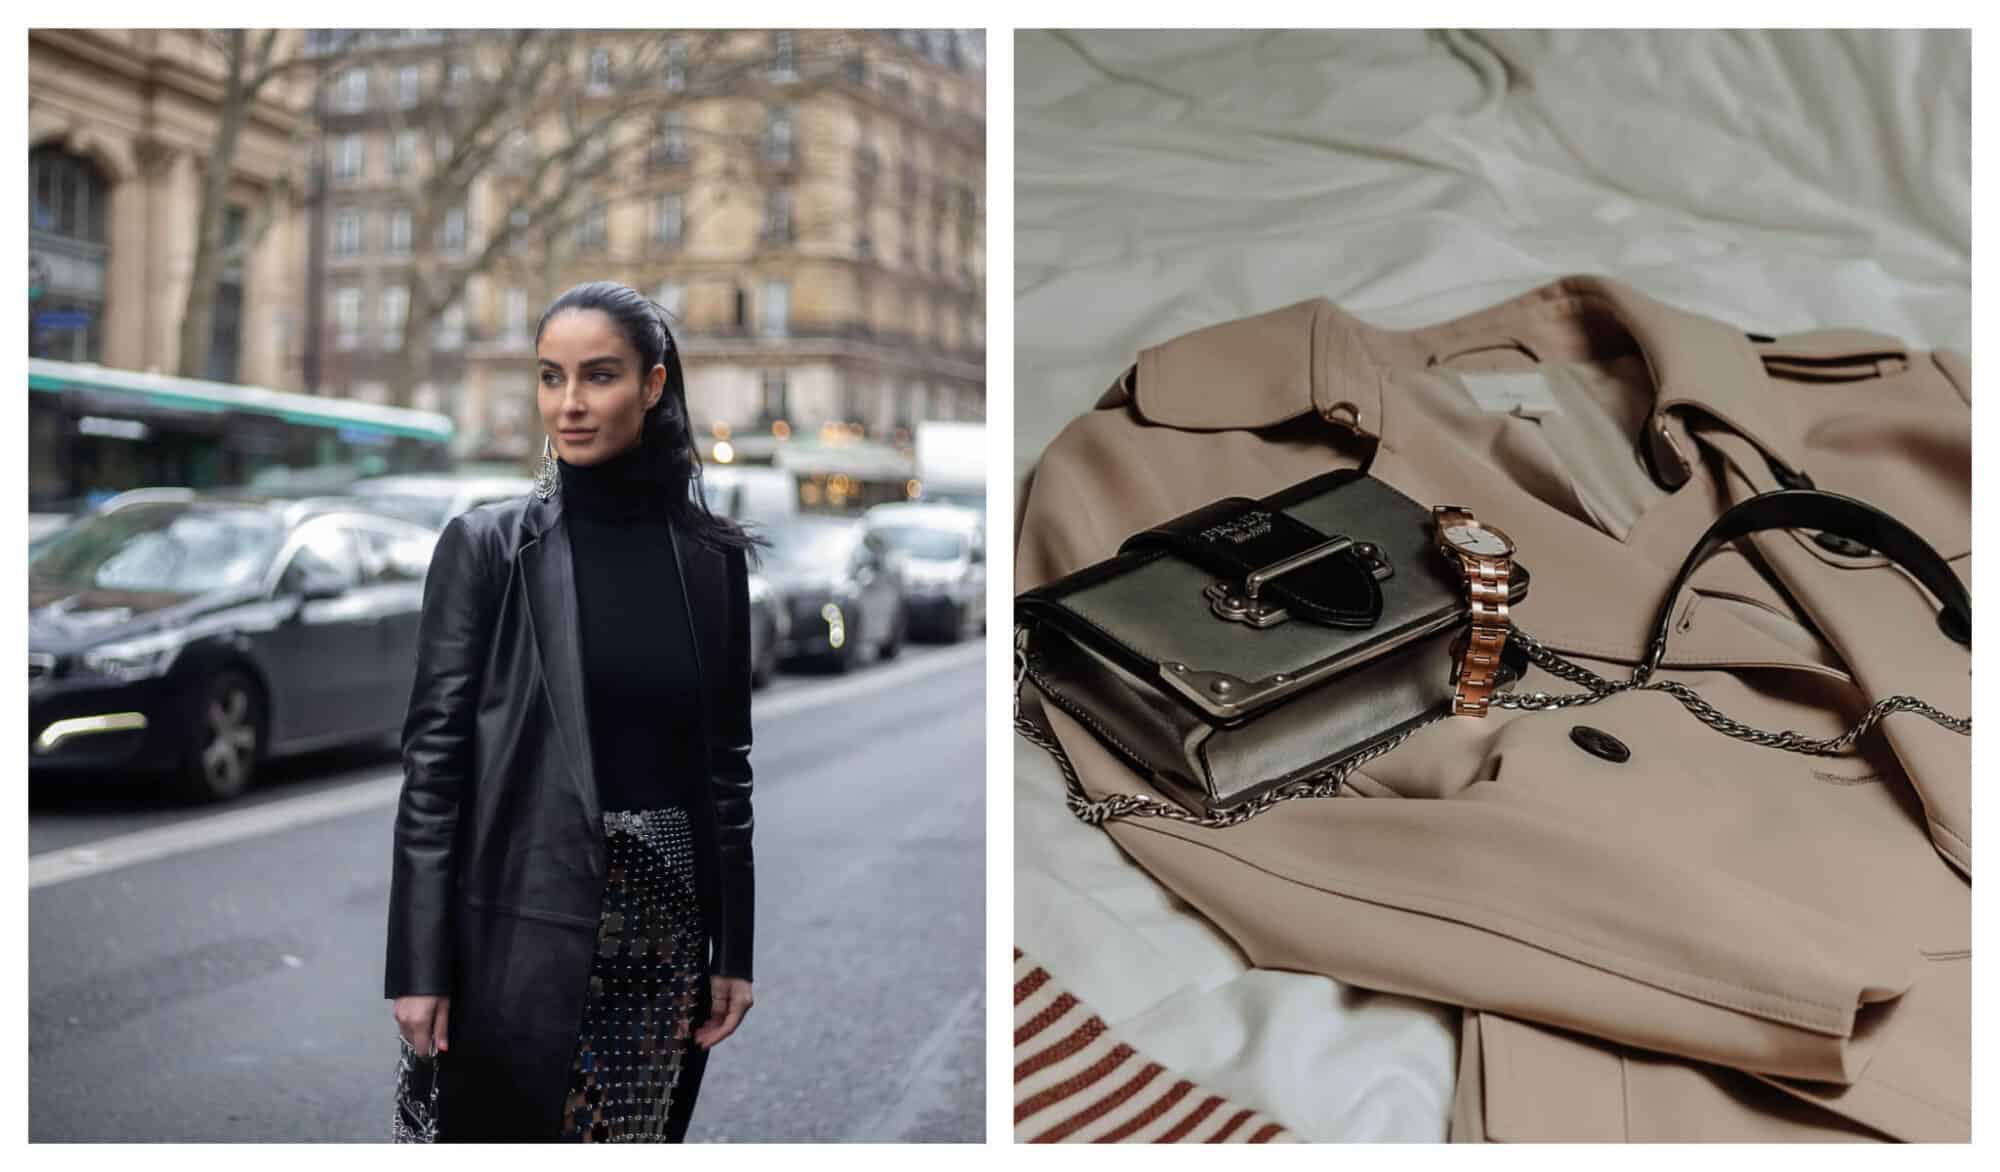 Left: A fashionable woman in black stands behind cars on a Paris street. Right: A beige trench coat, black Prada purse and a golden watch lay on a bed.